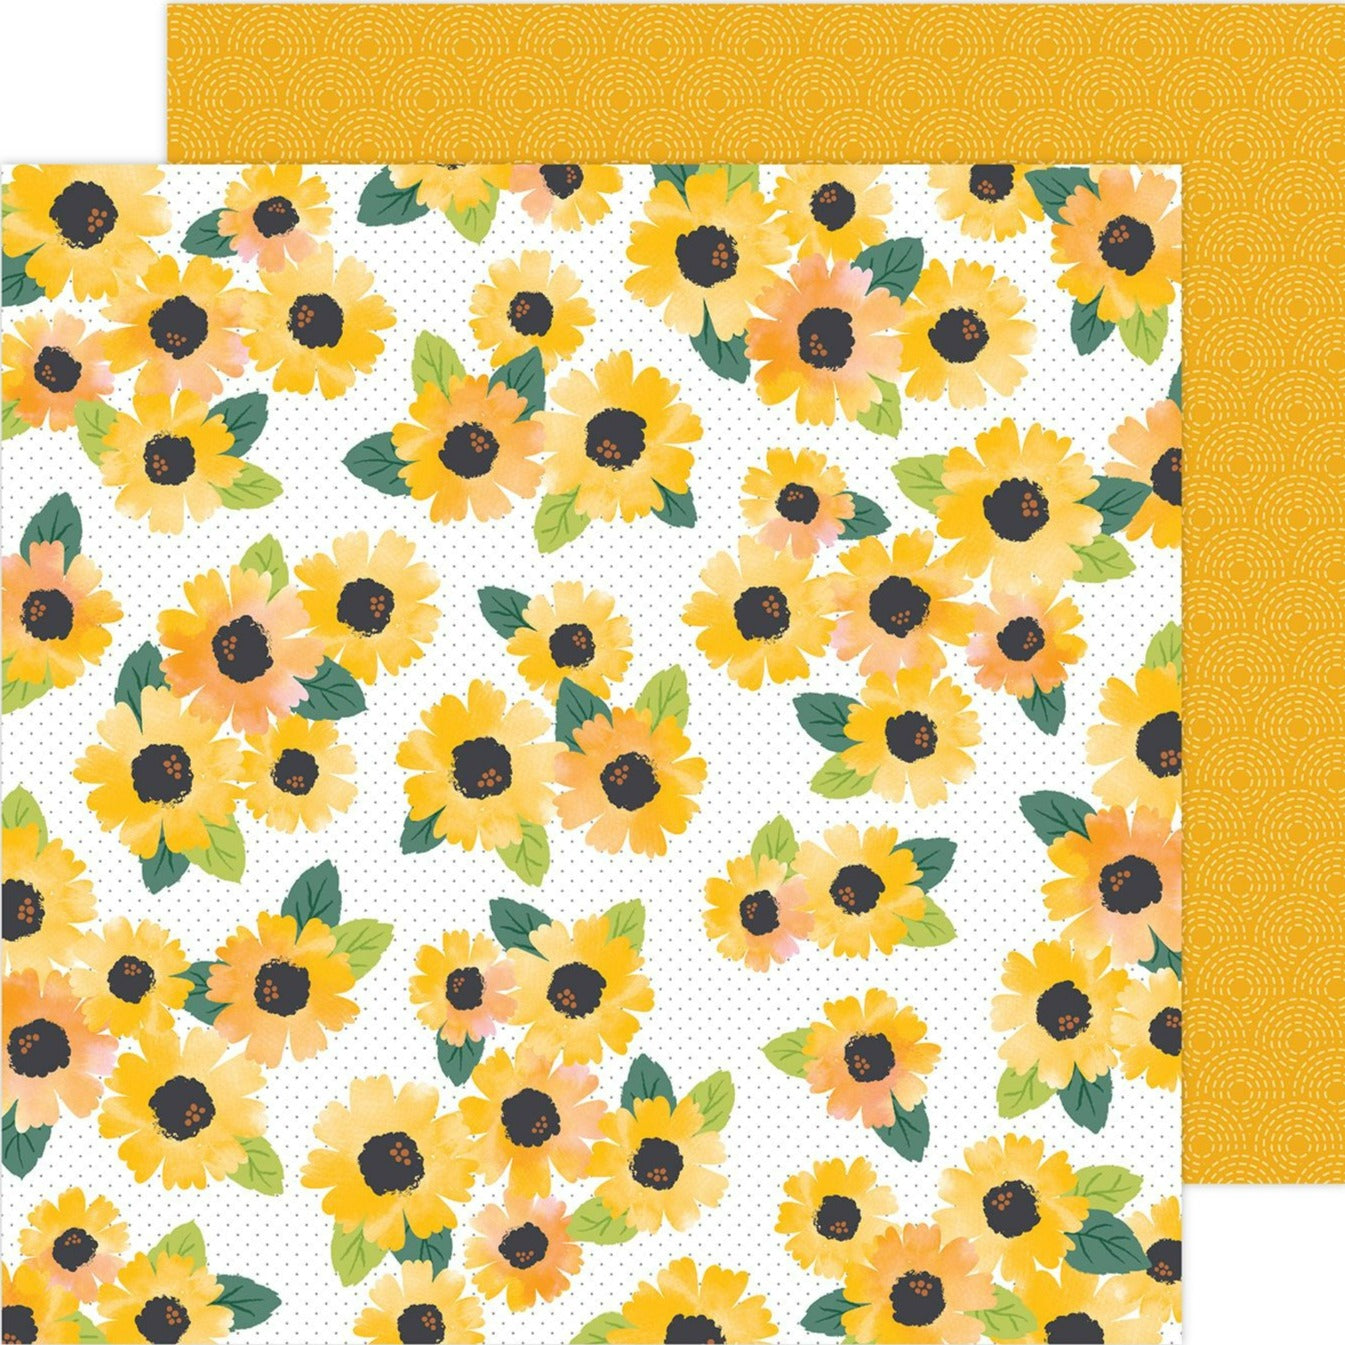 (Side A - yellow flowers with green leaves on a white with tiny black polka-dots background, Side B - yellow circular geometric pattern on a golden yellow background)